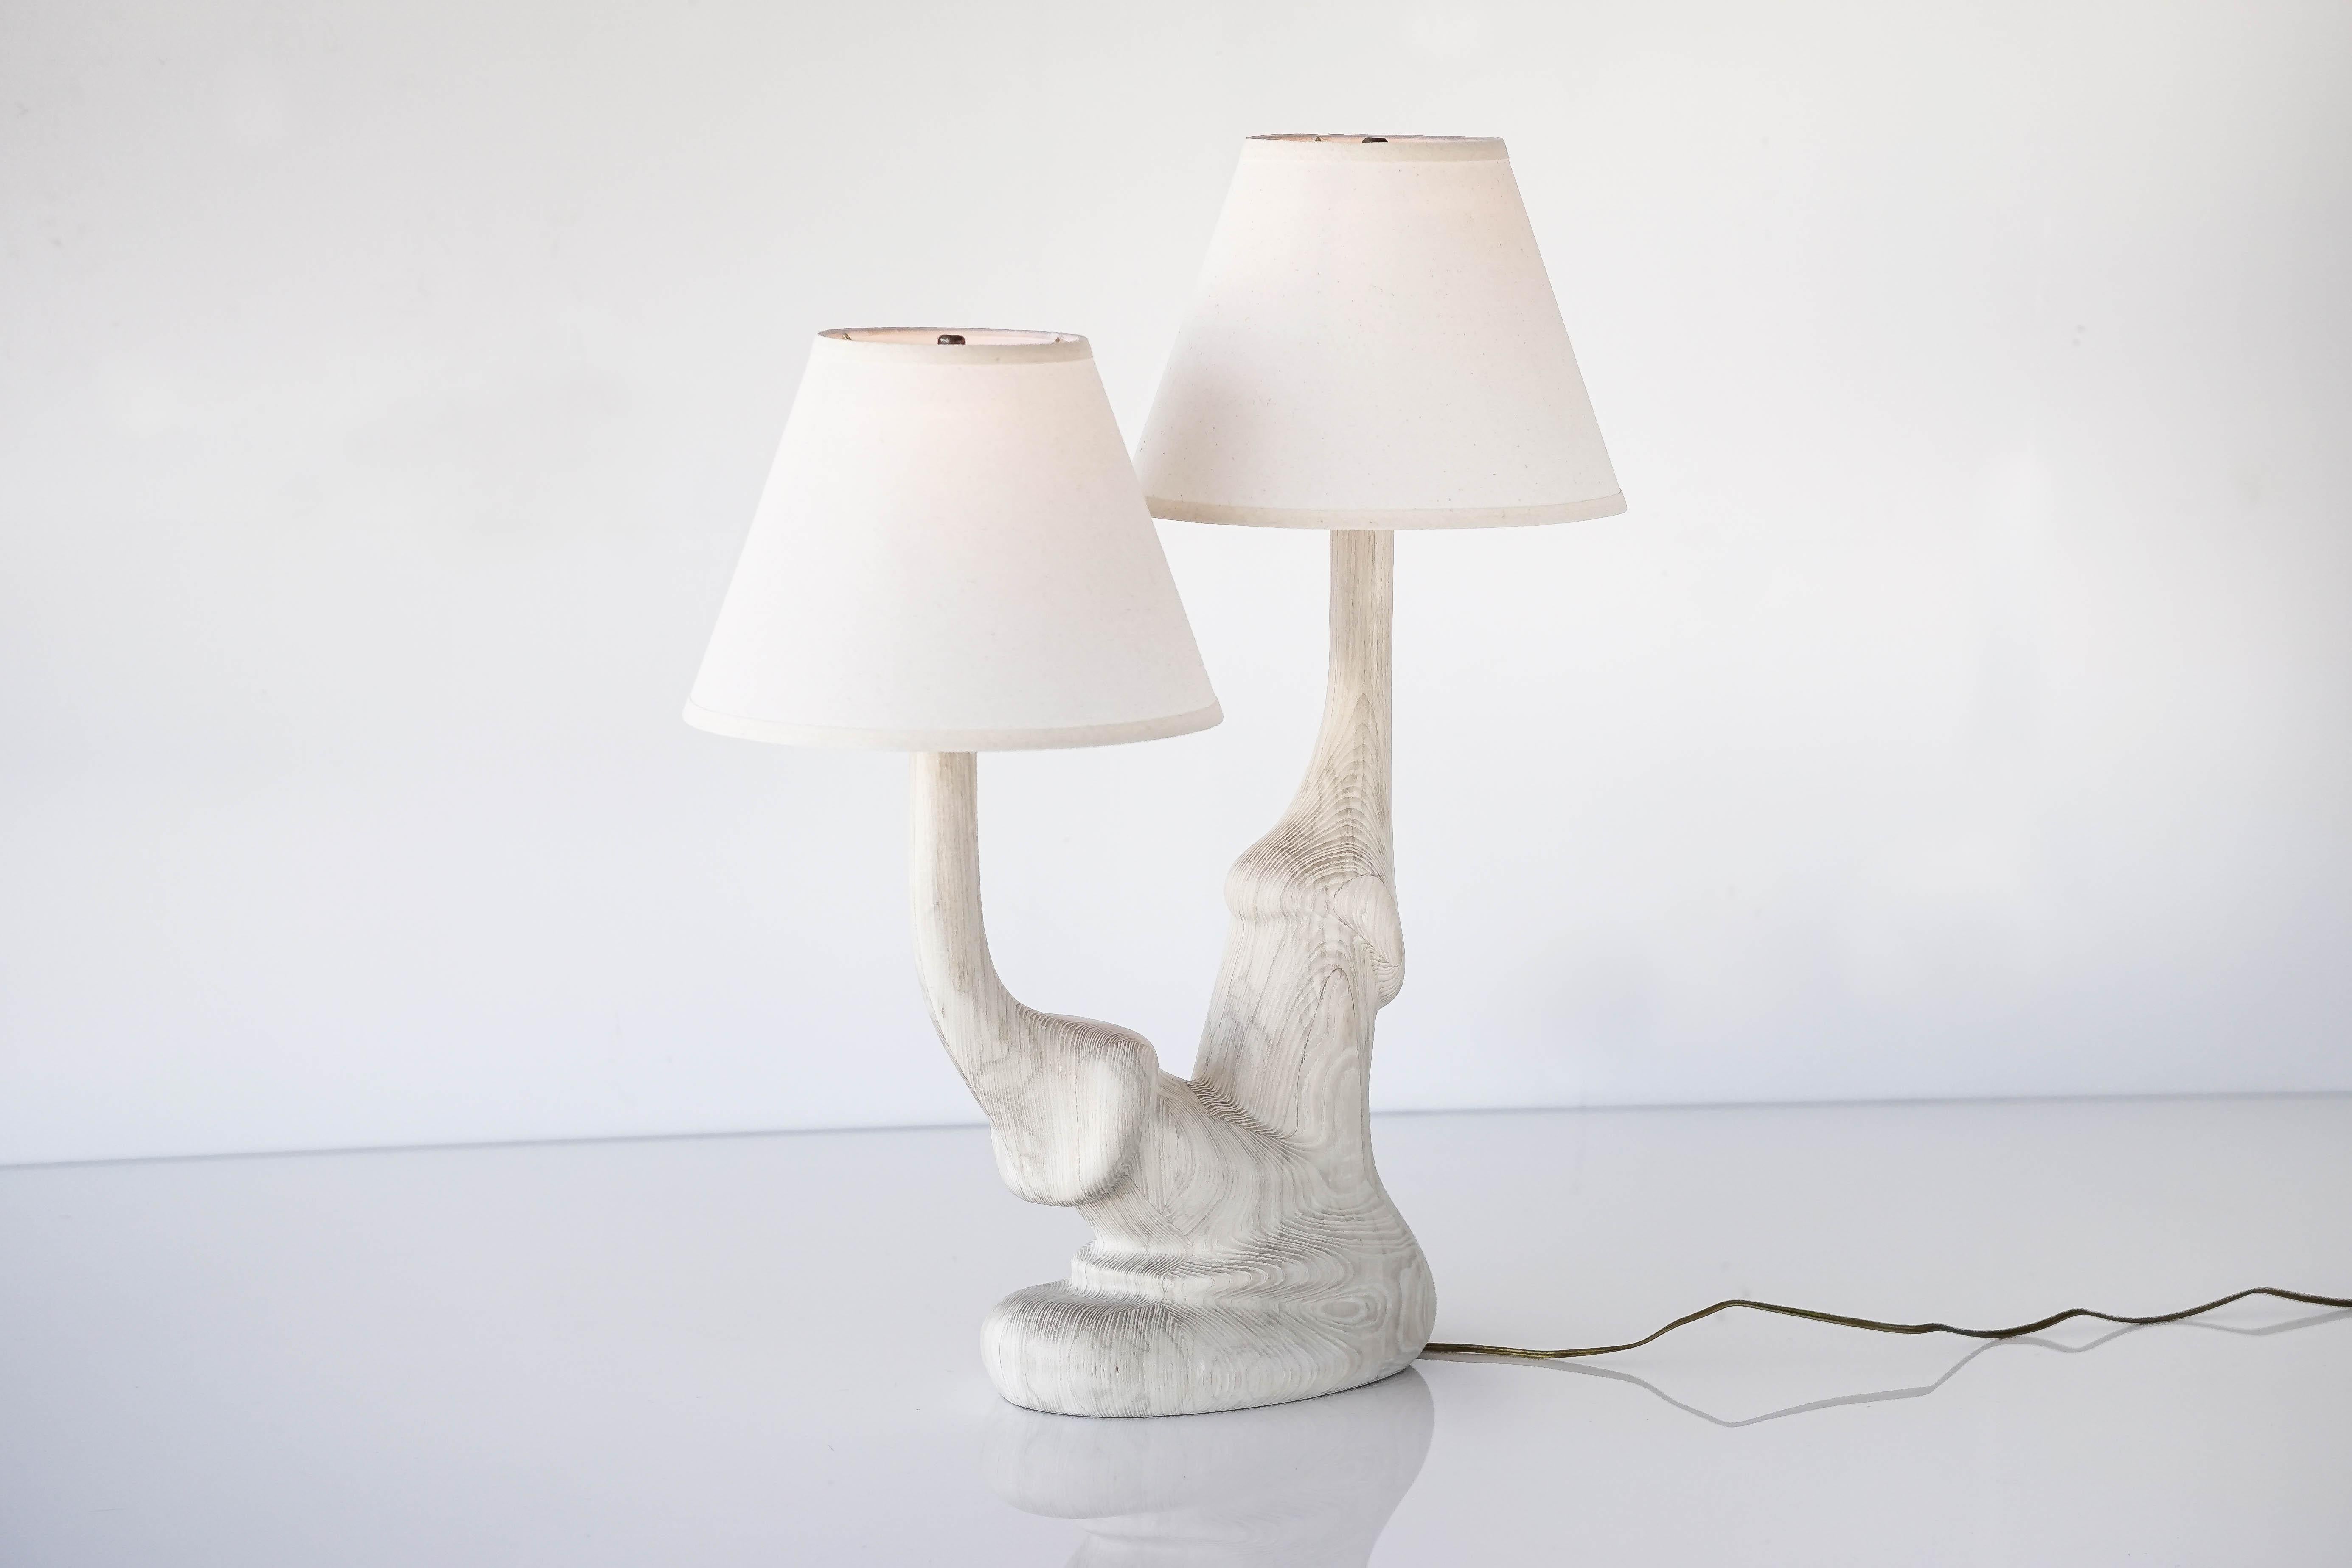 Carved solid white oak wood table lamp with double lamp shade inspired by mushrooms. 

Shown in bleached white oak with wax finish with white linen lamp shade. 

Custom wood types available. 

Custom lamp shade available.